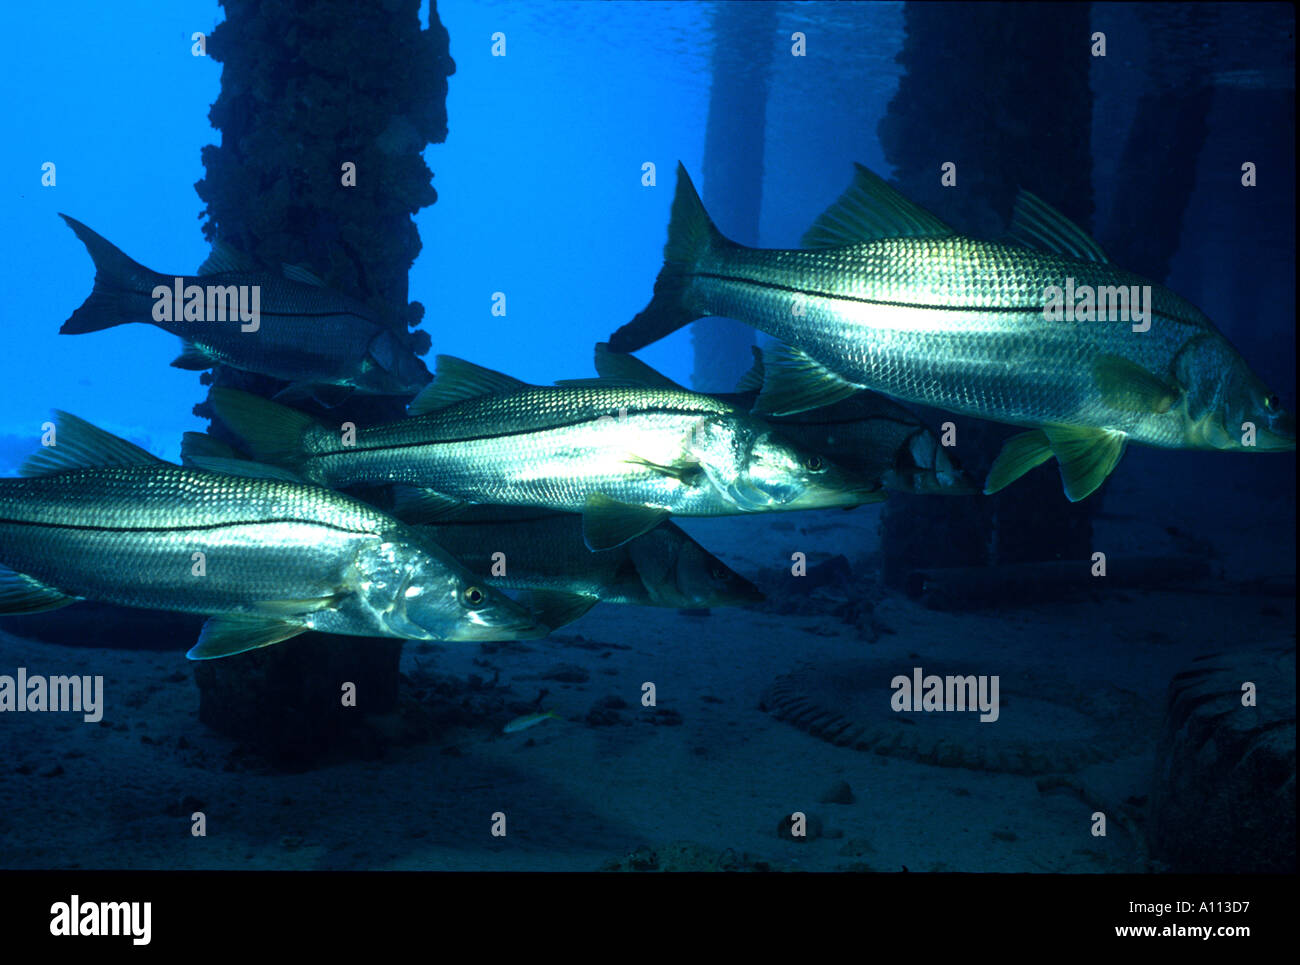 A BAND OF COMMON SNOOK Centropomus undecimalis IN THE GULF OF MEXICO Stock Photo